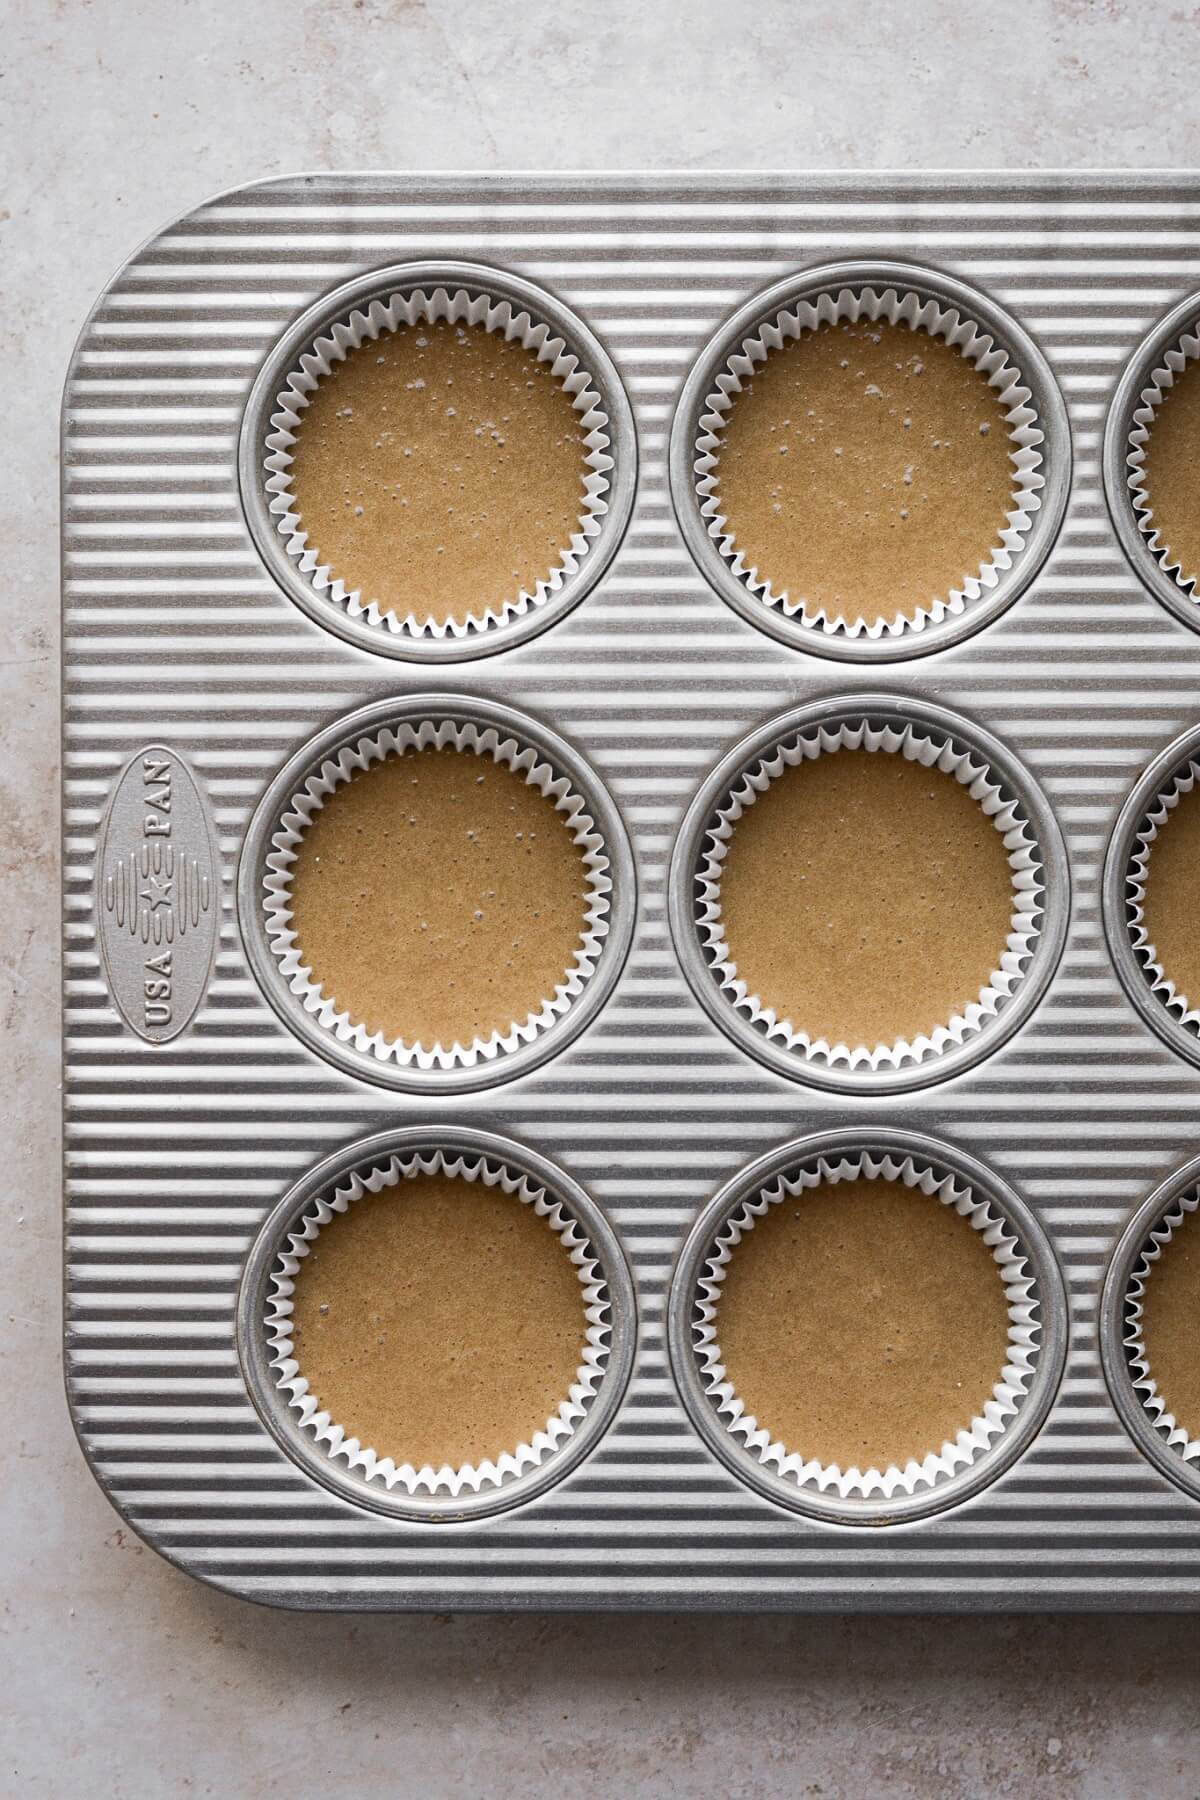 Step 7 for making coffee cupcakes.